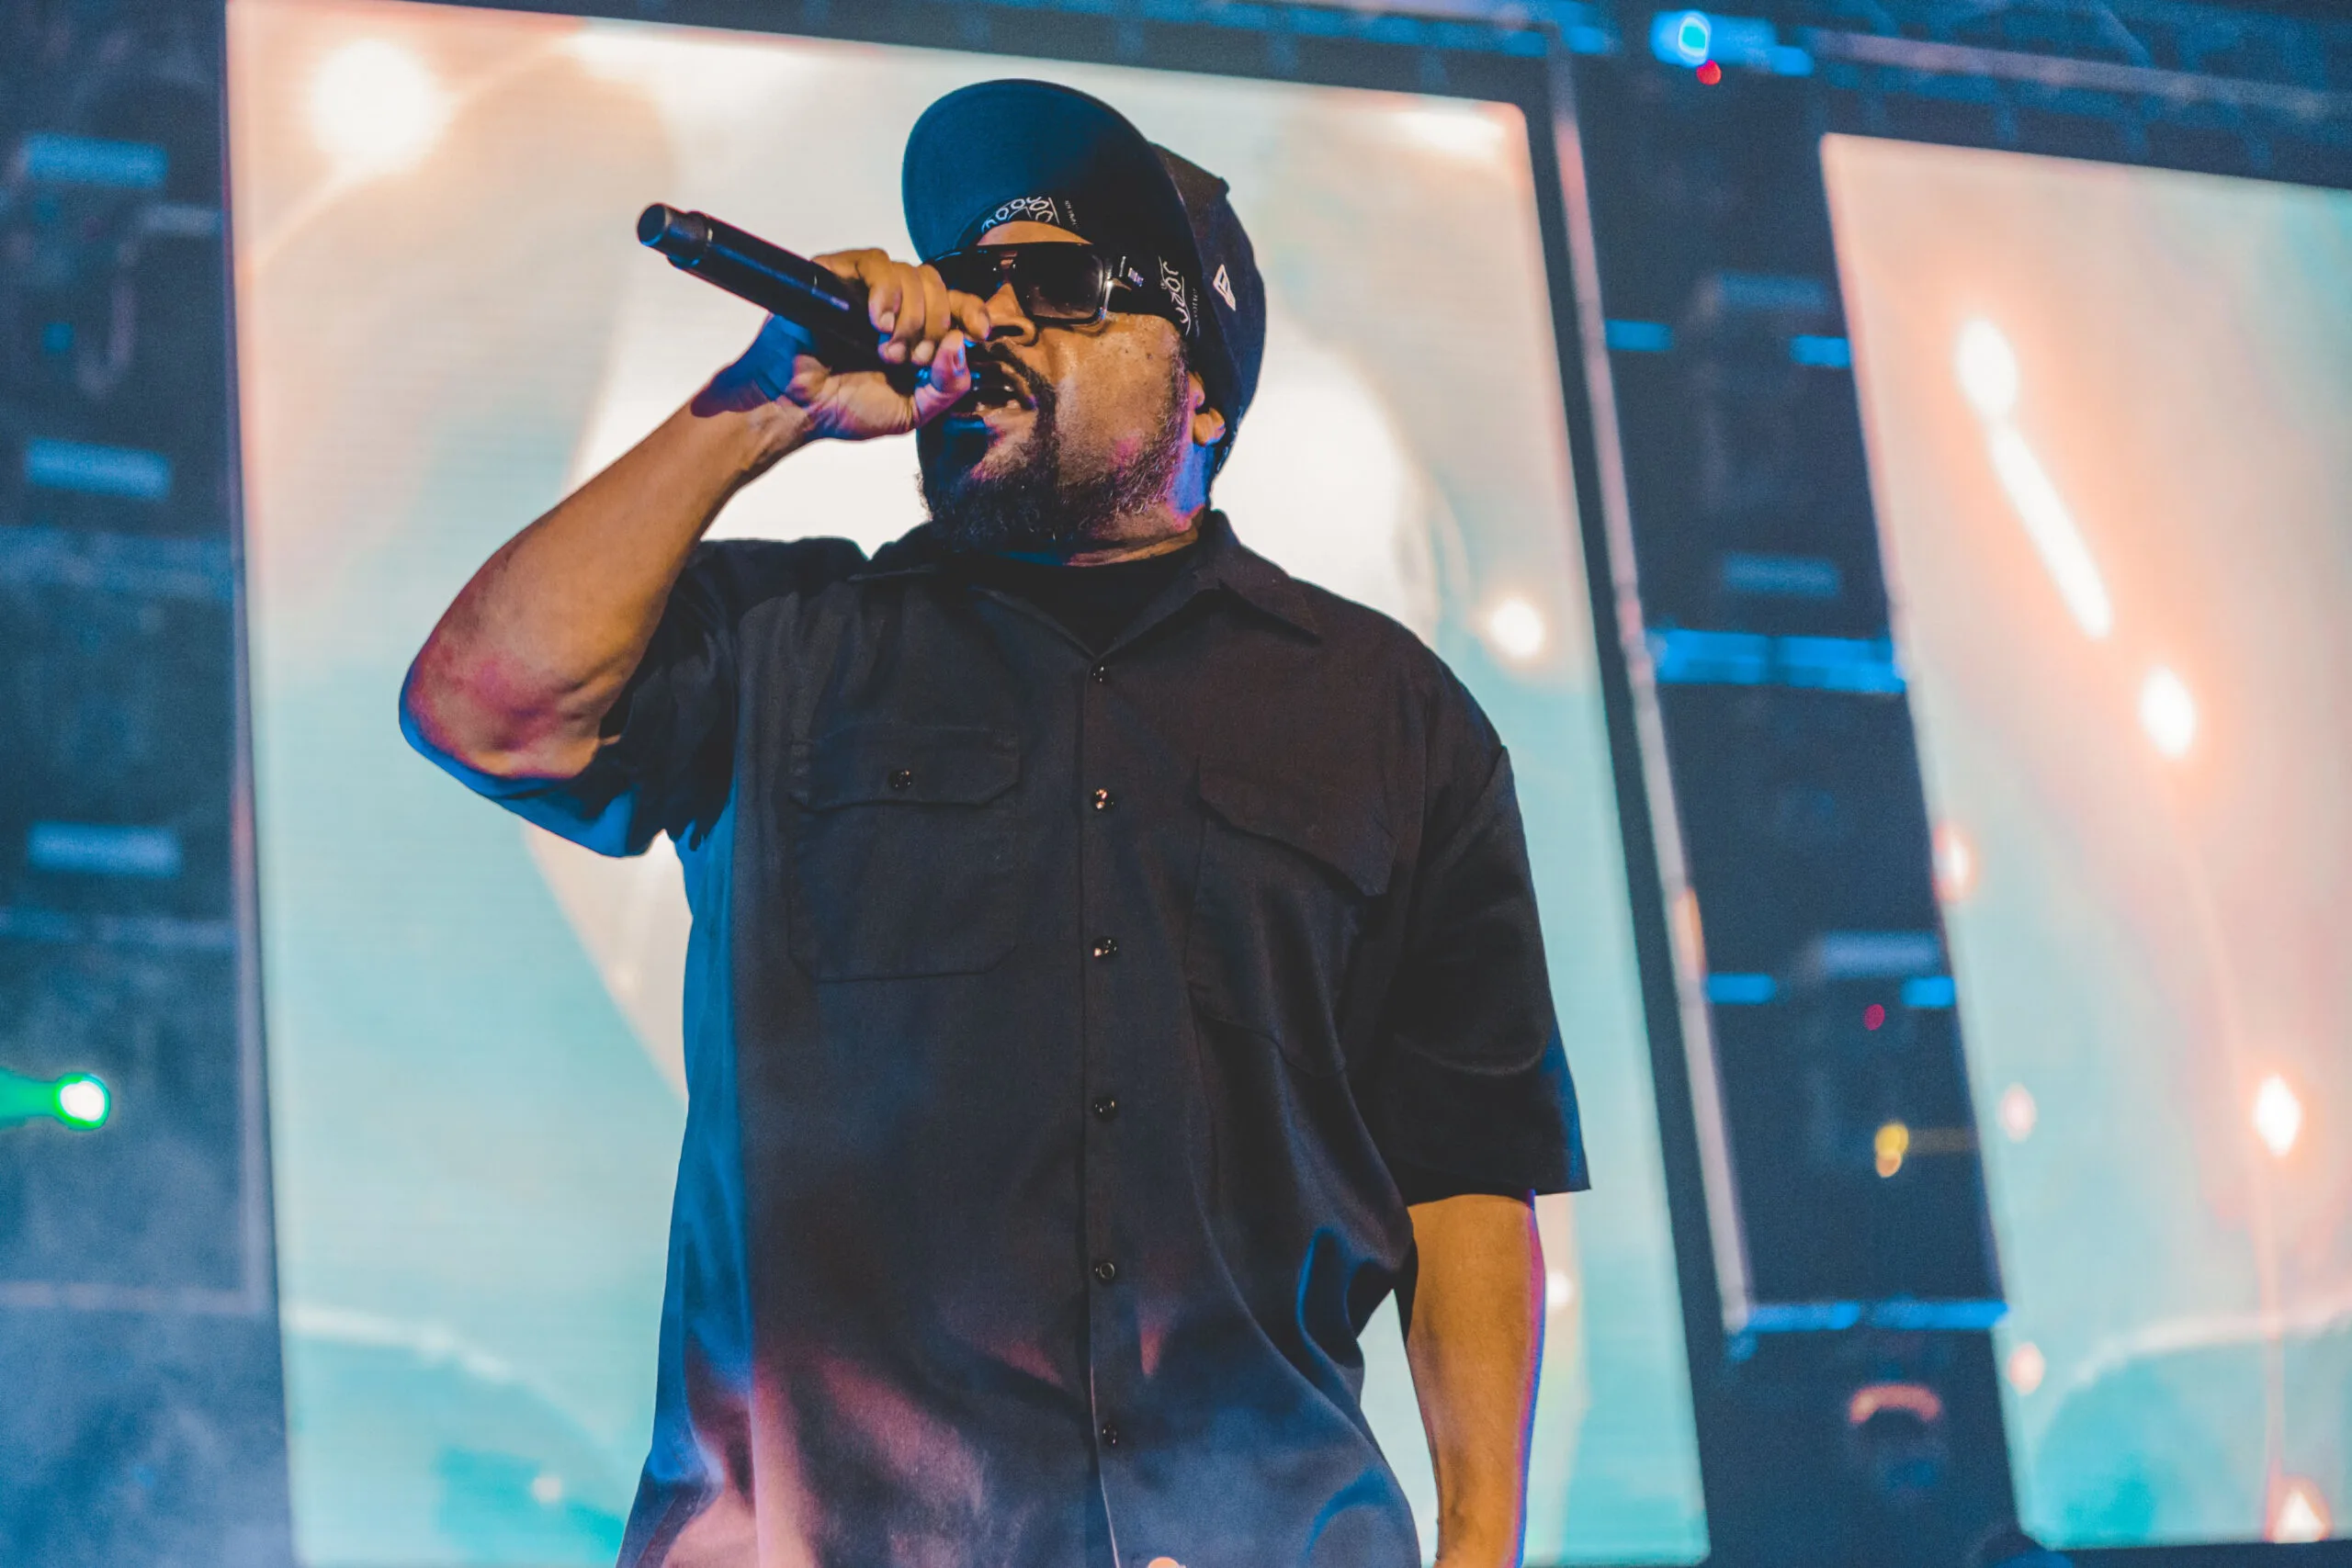 A close-up shot of the Ice Cube singing on the stage